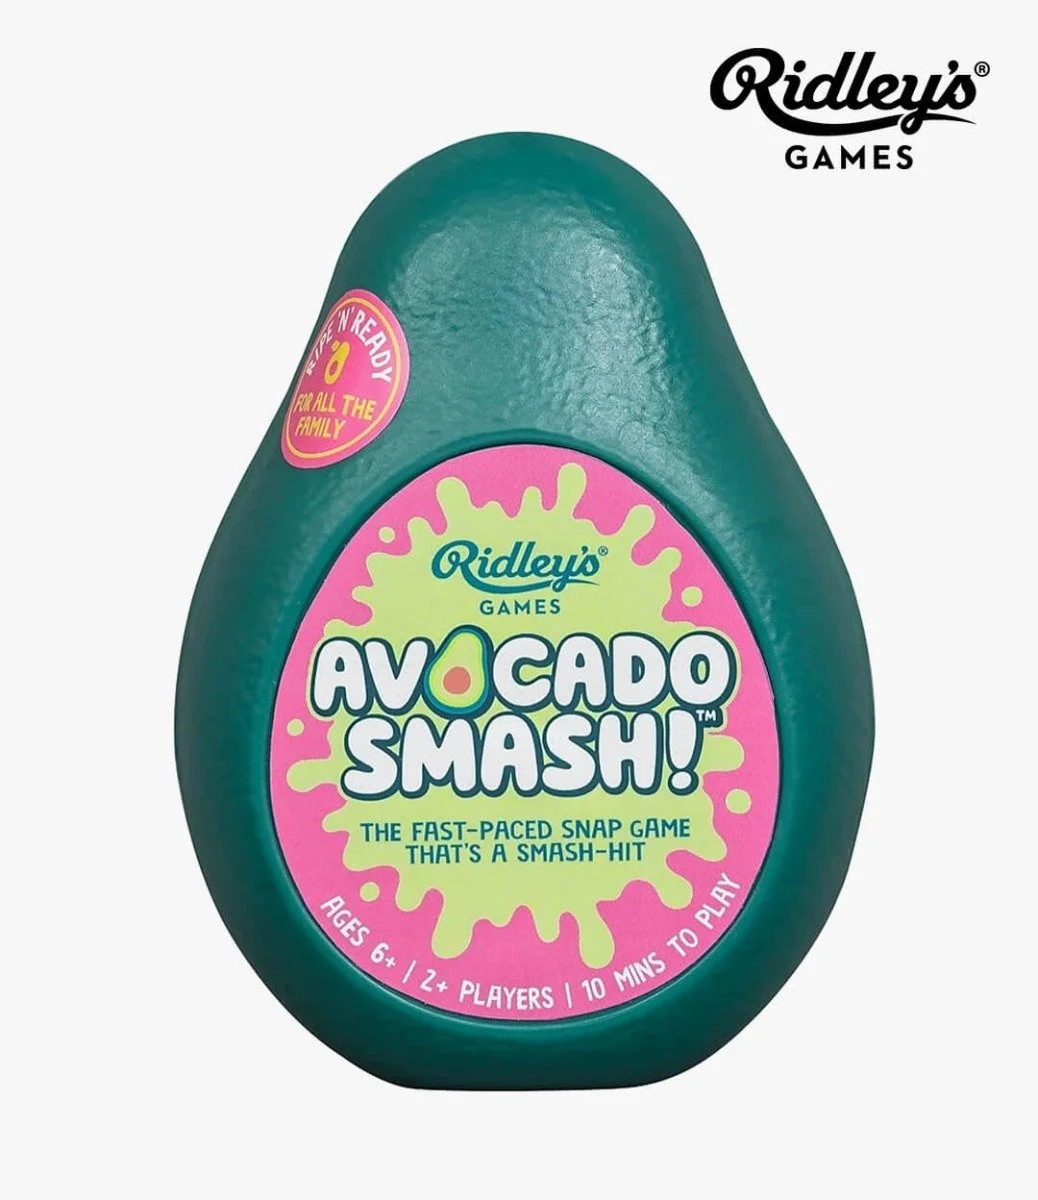 Avocado Smash Game by Ridley's